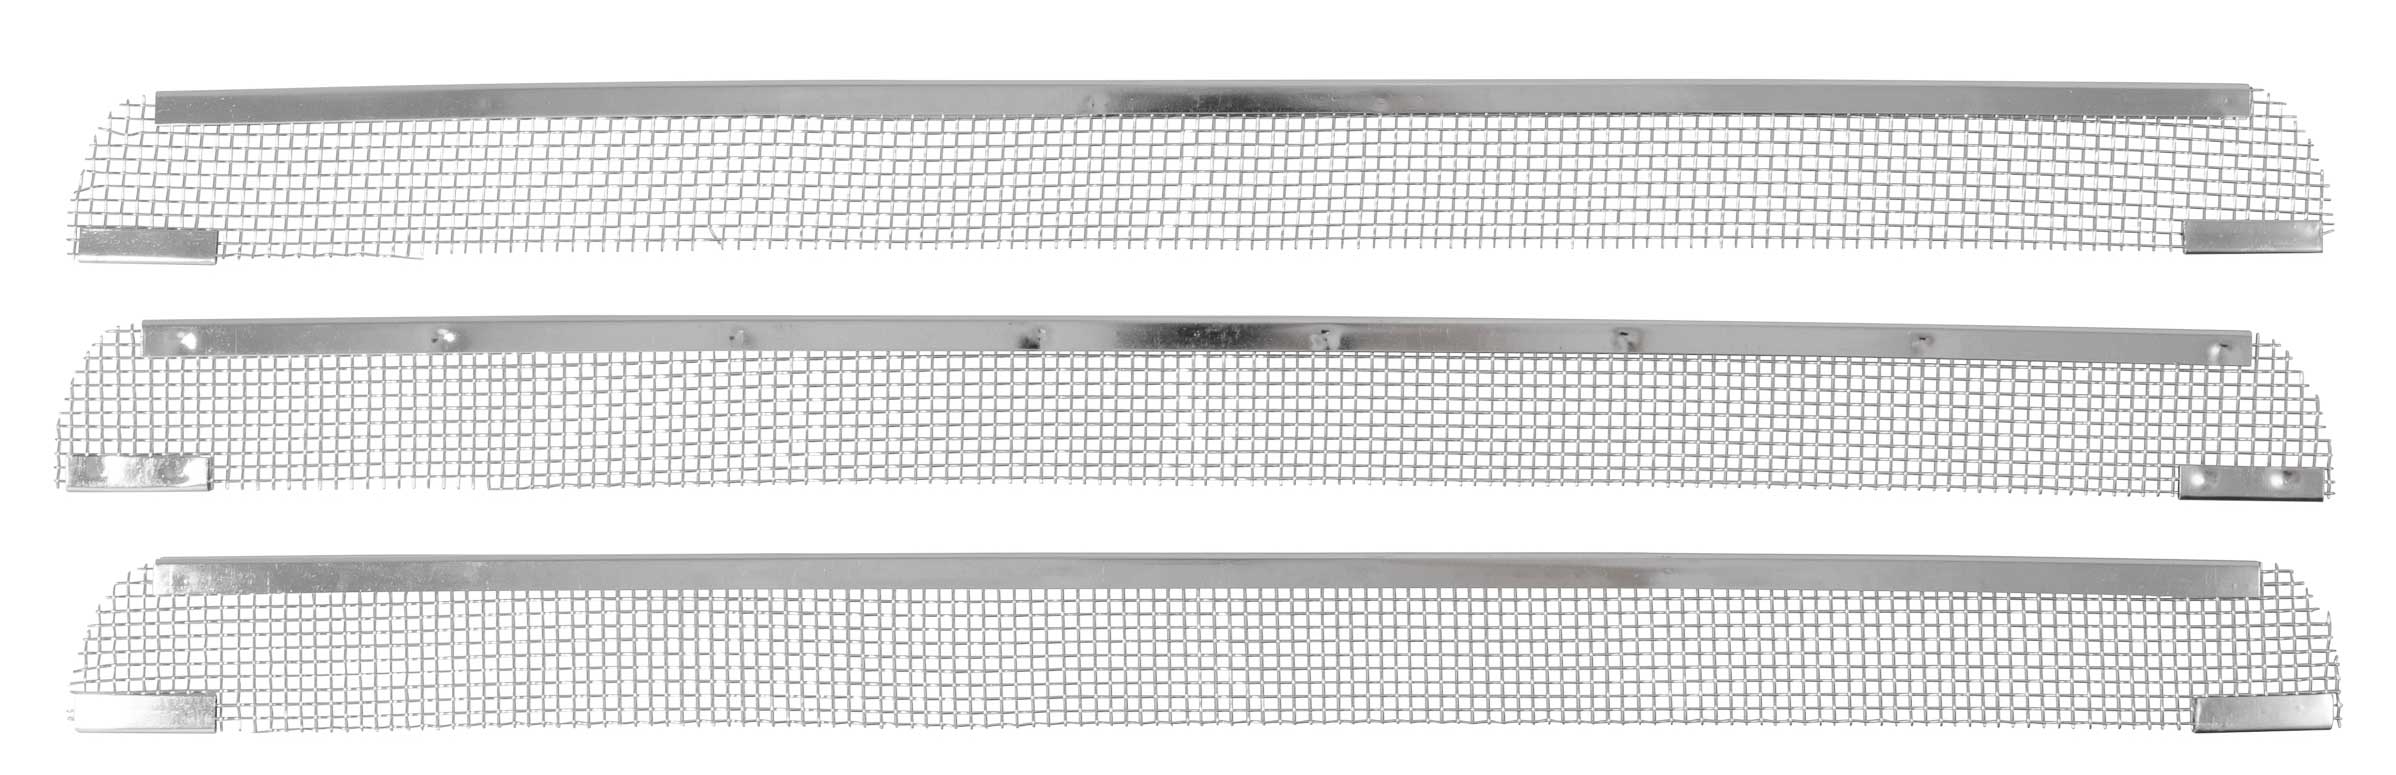 Camco 42139 Flying Insect Screen for Dometic Refrigerator Vents - 20" x 1.5", Pack of 3